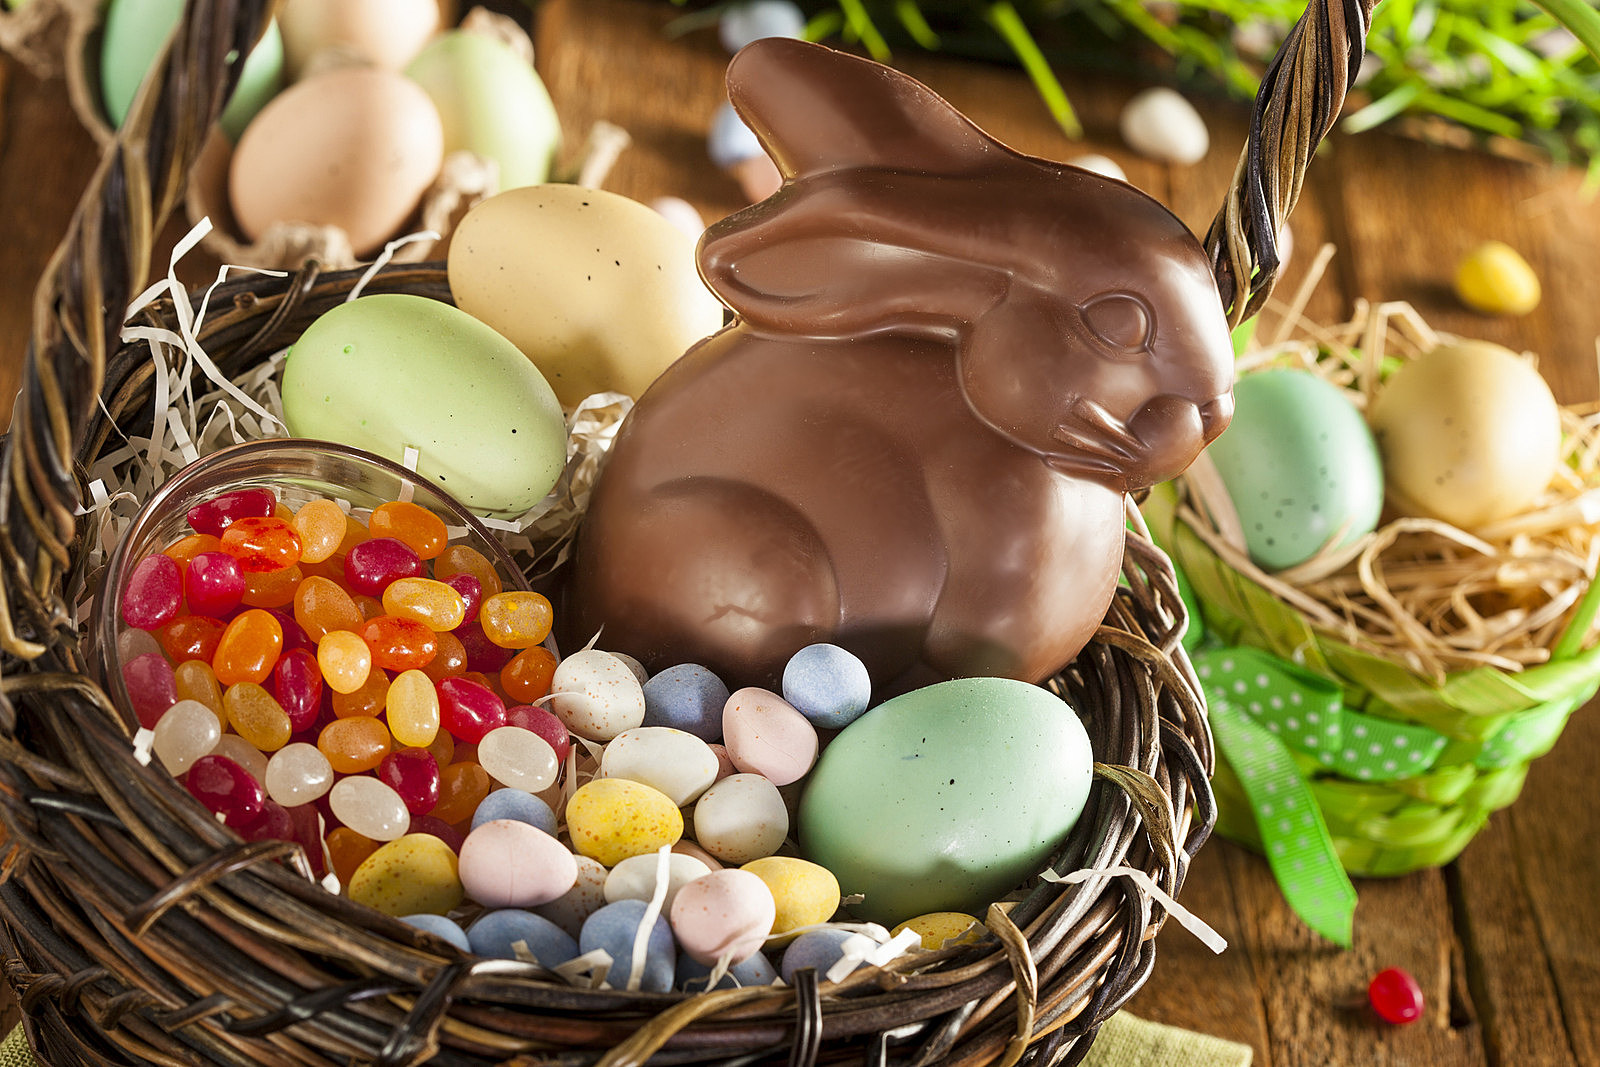 The Most Popular Easter Candy in Massachusetts is,